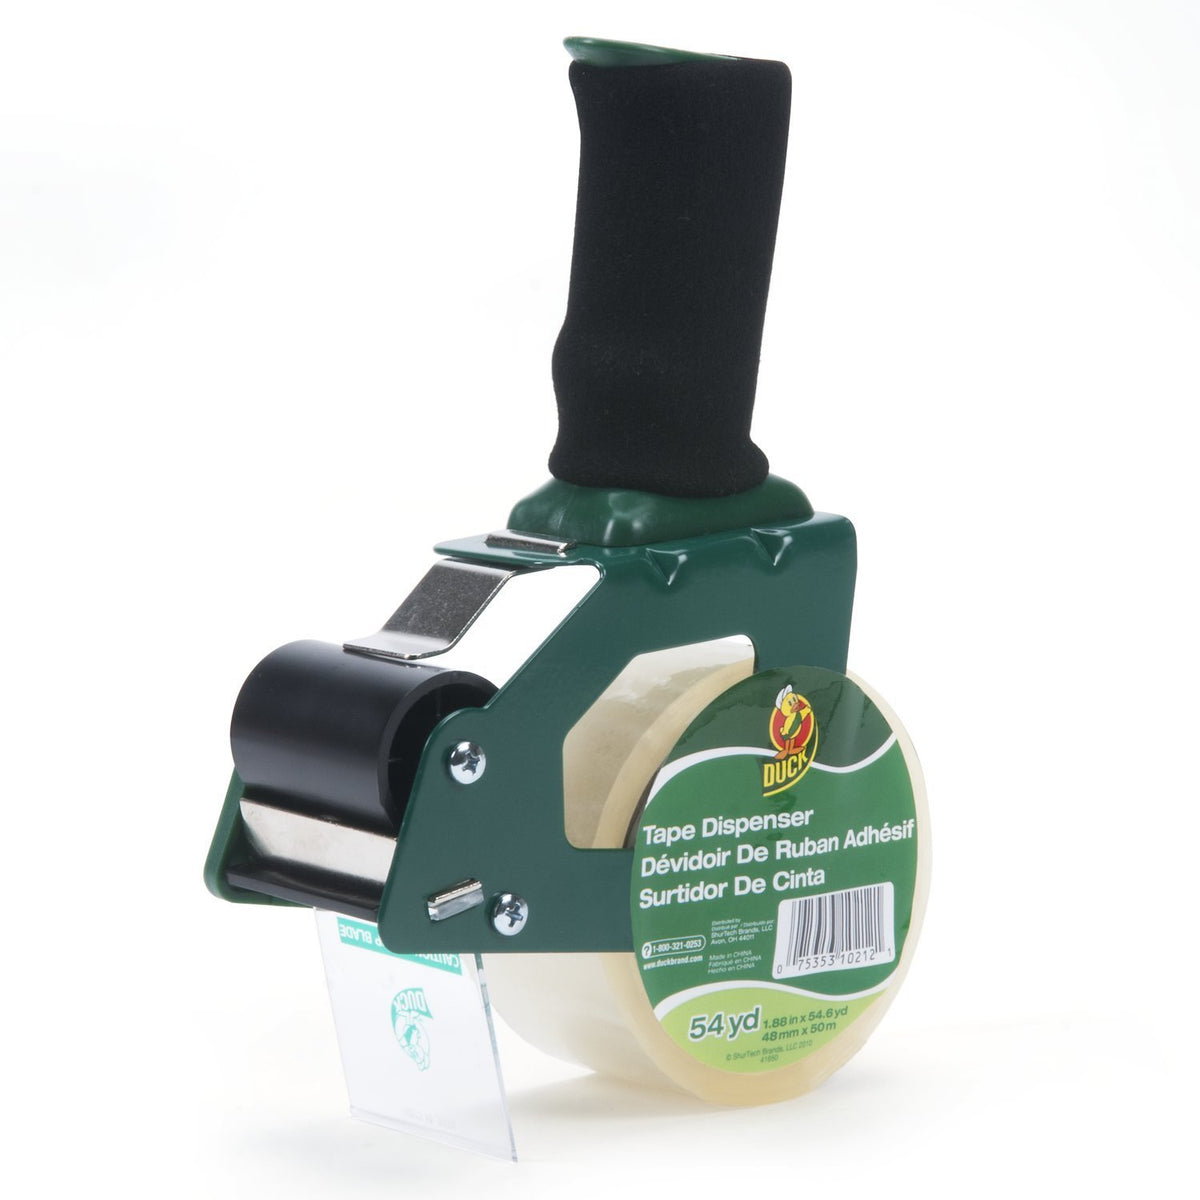 buy mailers & shipping packing tape dispensers at cheap rate in bulk. wholesale & retail office essentials & tools store.